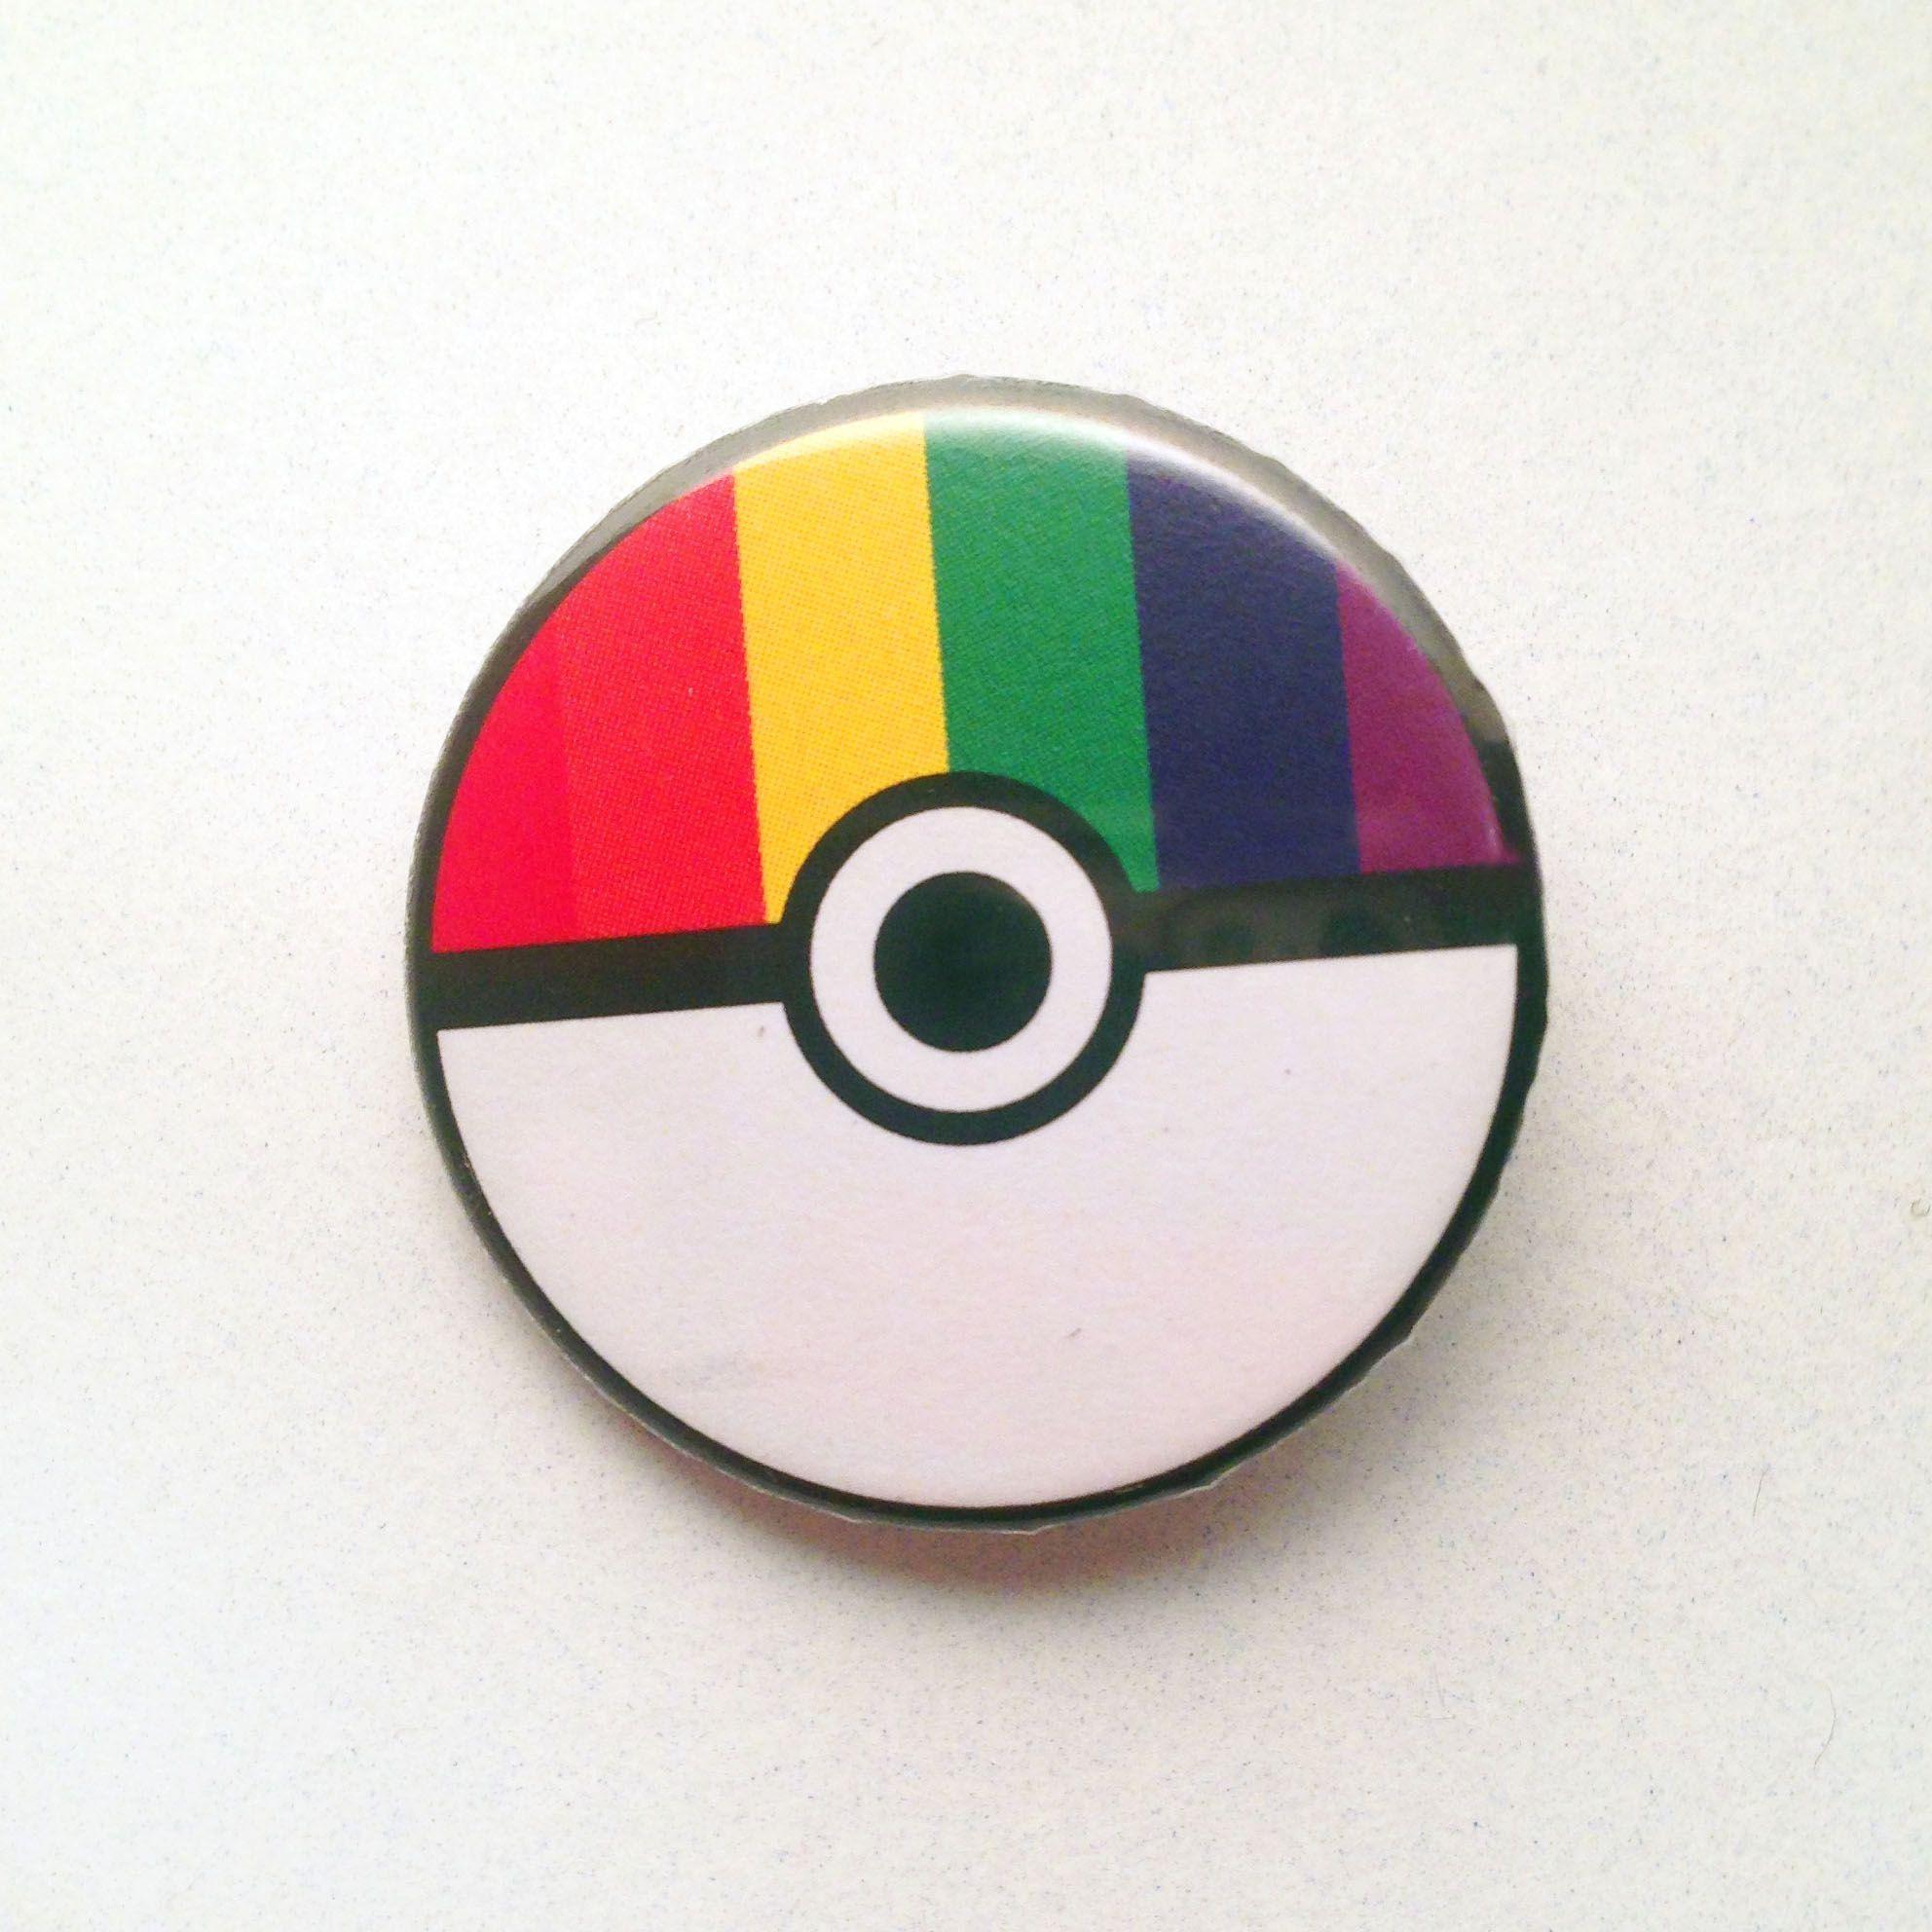 Gay pride buttons